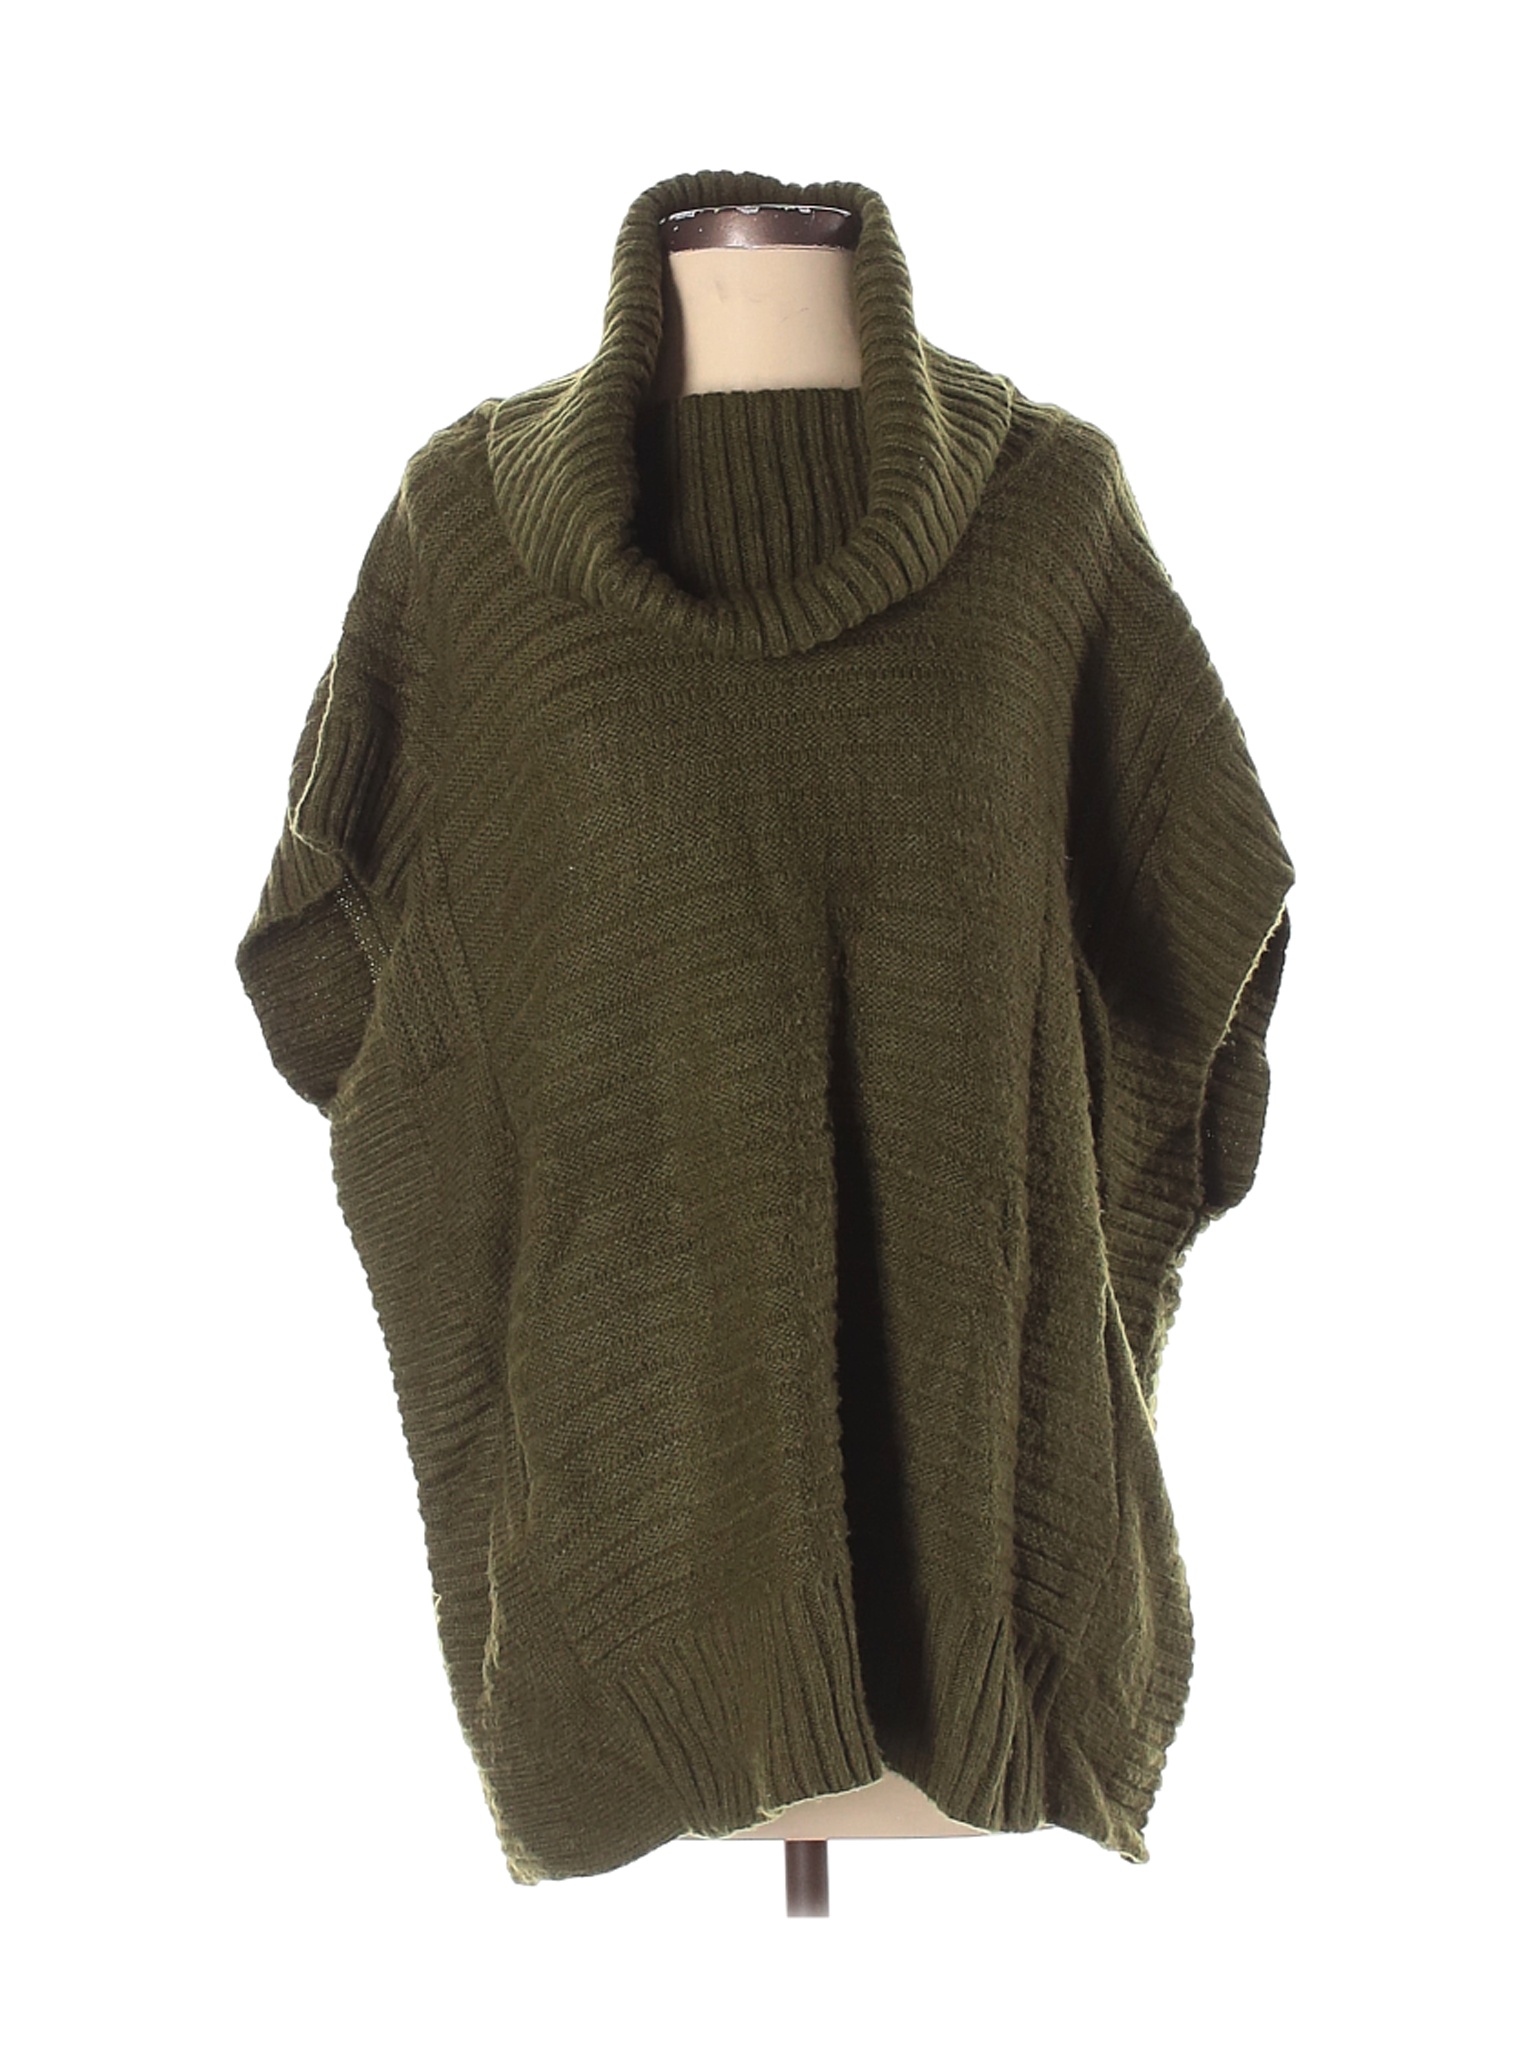 Market and Spruce Women Green Pullover Sweater XS | eBay